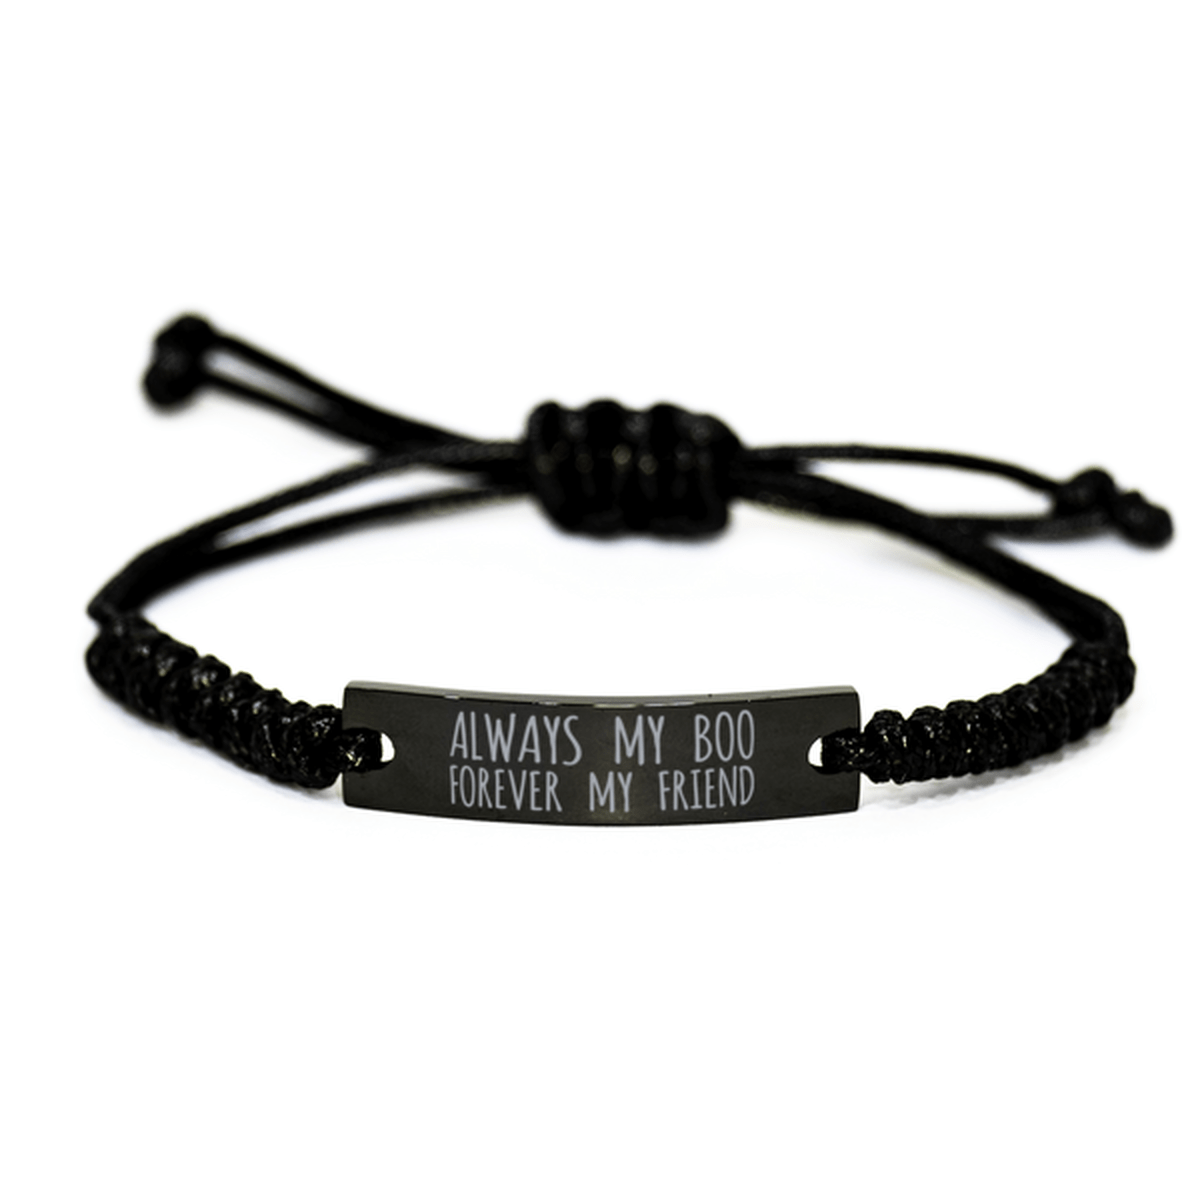 Inspirational Boo Black Rope Bracelet, Always My Boo Forever My Friend, Best Birthday Gifts For Family